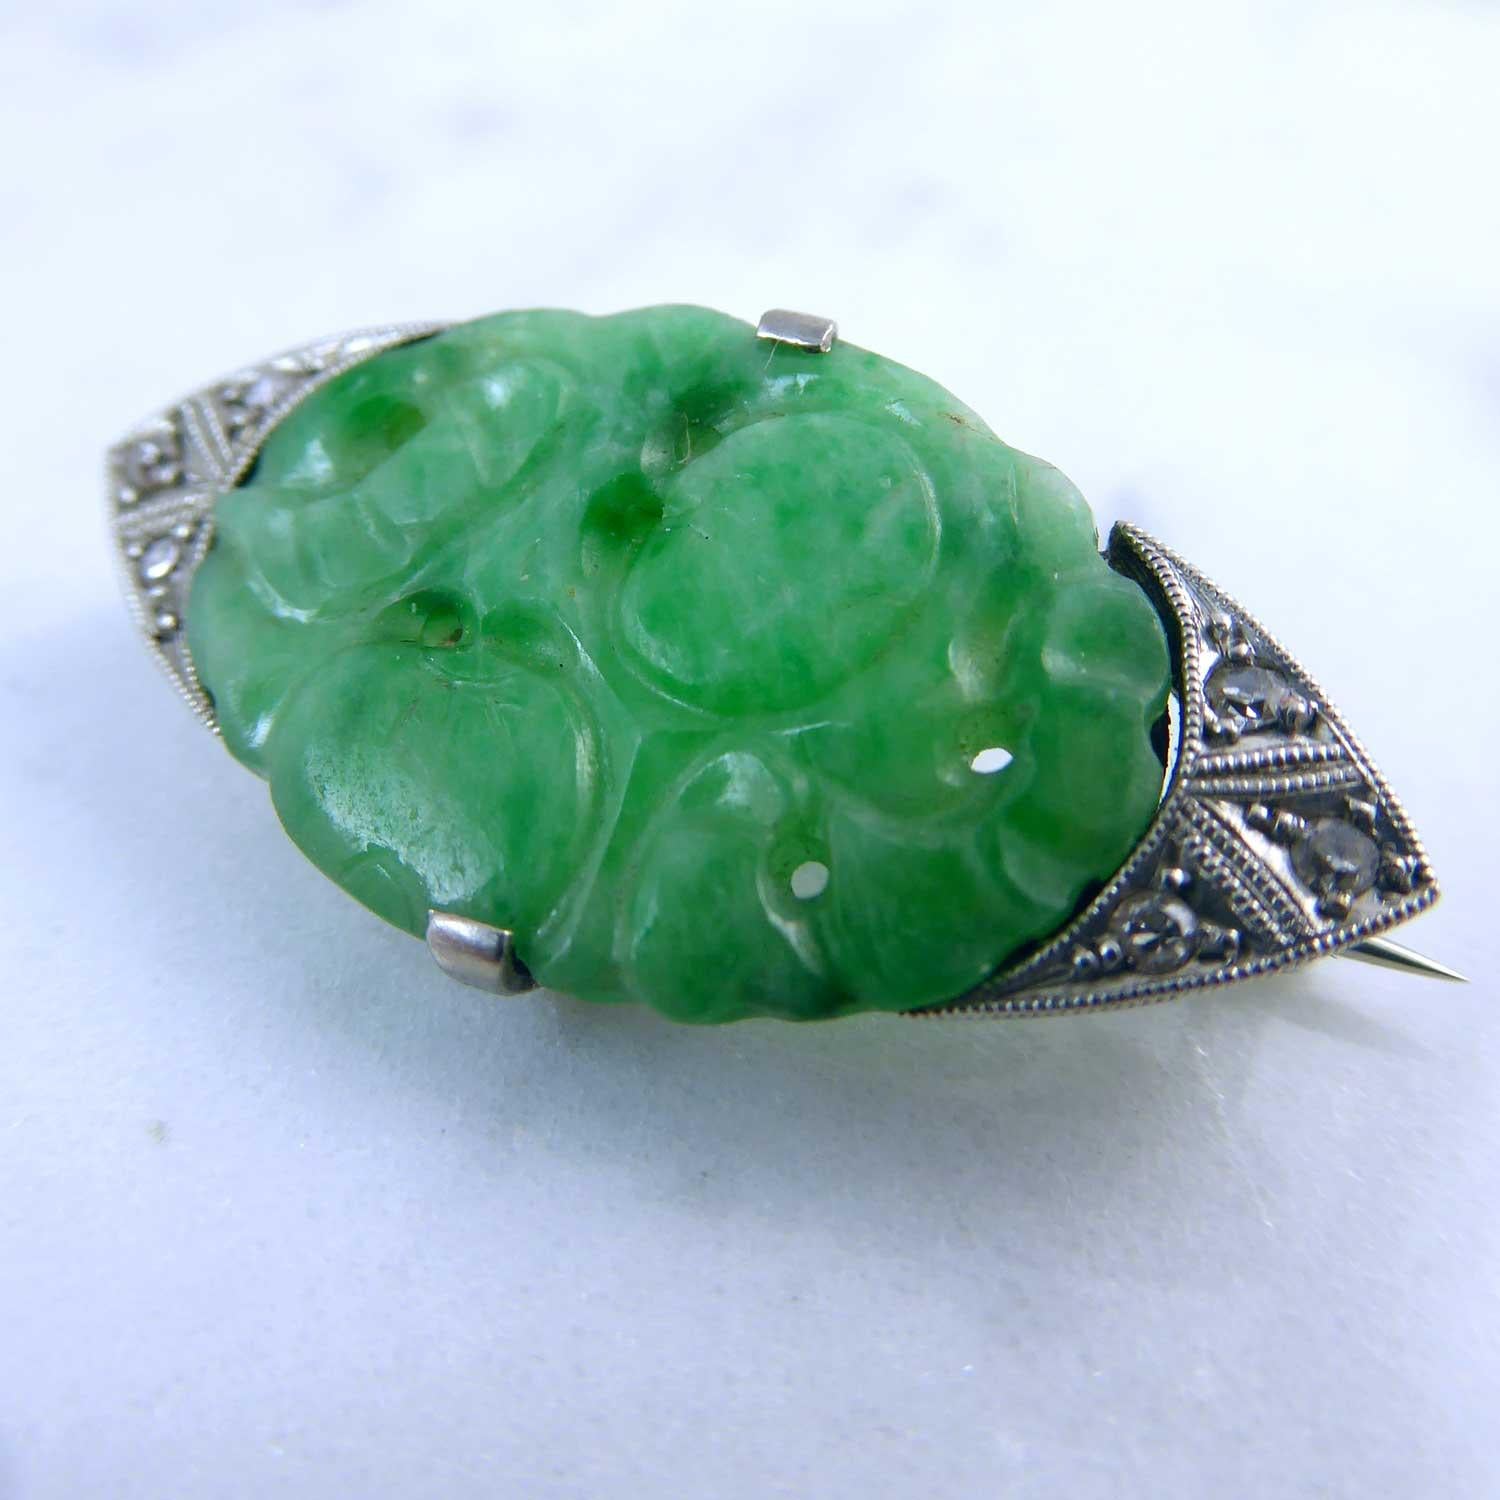 Antique Brooch Carved Jadeite and Old Cut Diamonds, Midcentury Art Deco ...